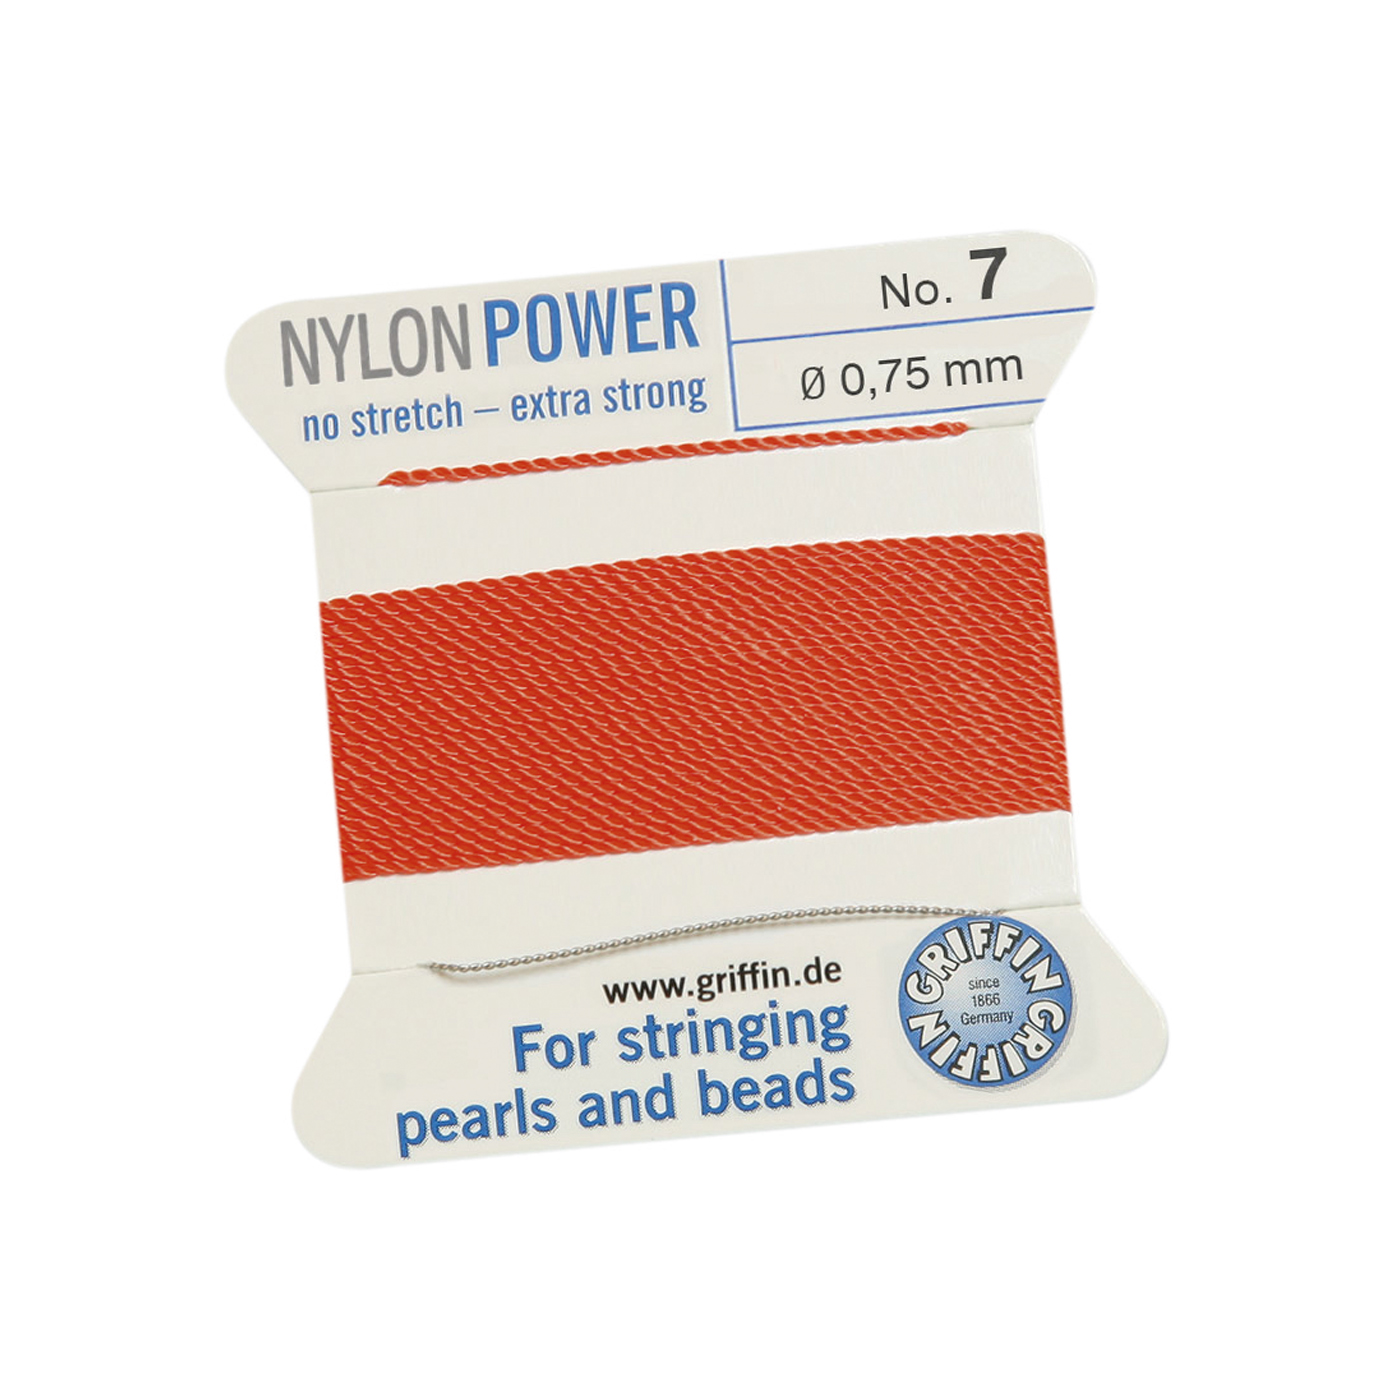 Bead Cord NylonPower, Coral Red, No. 7 - 2 m